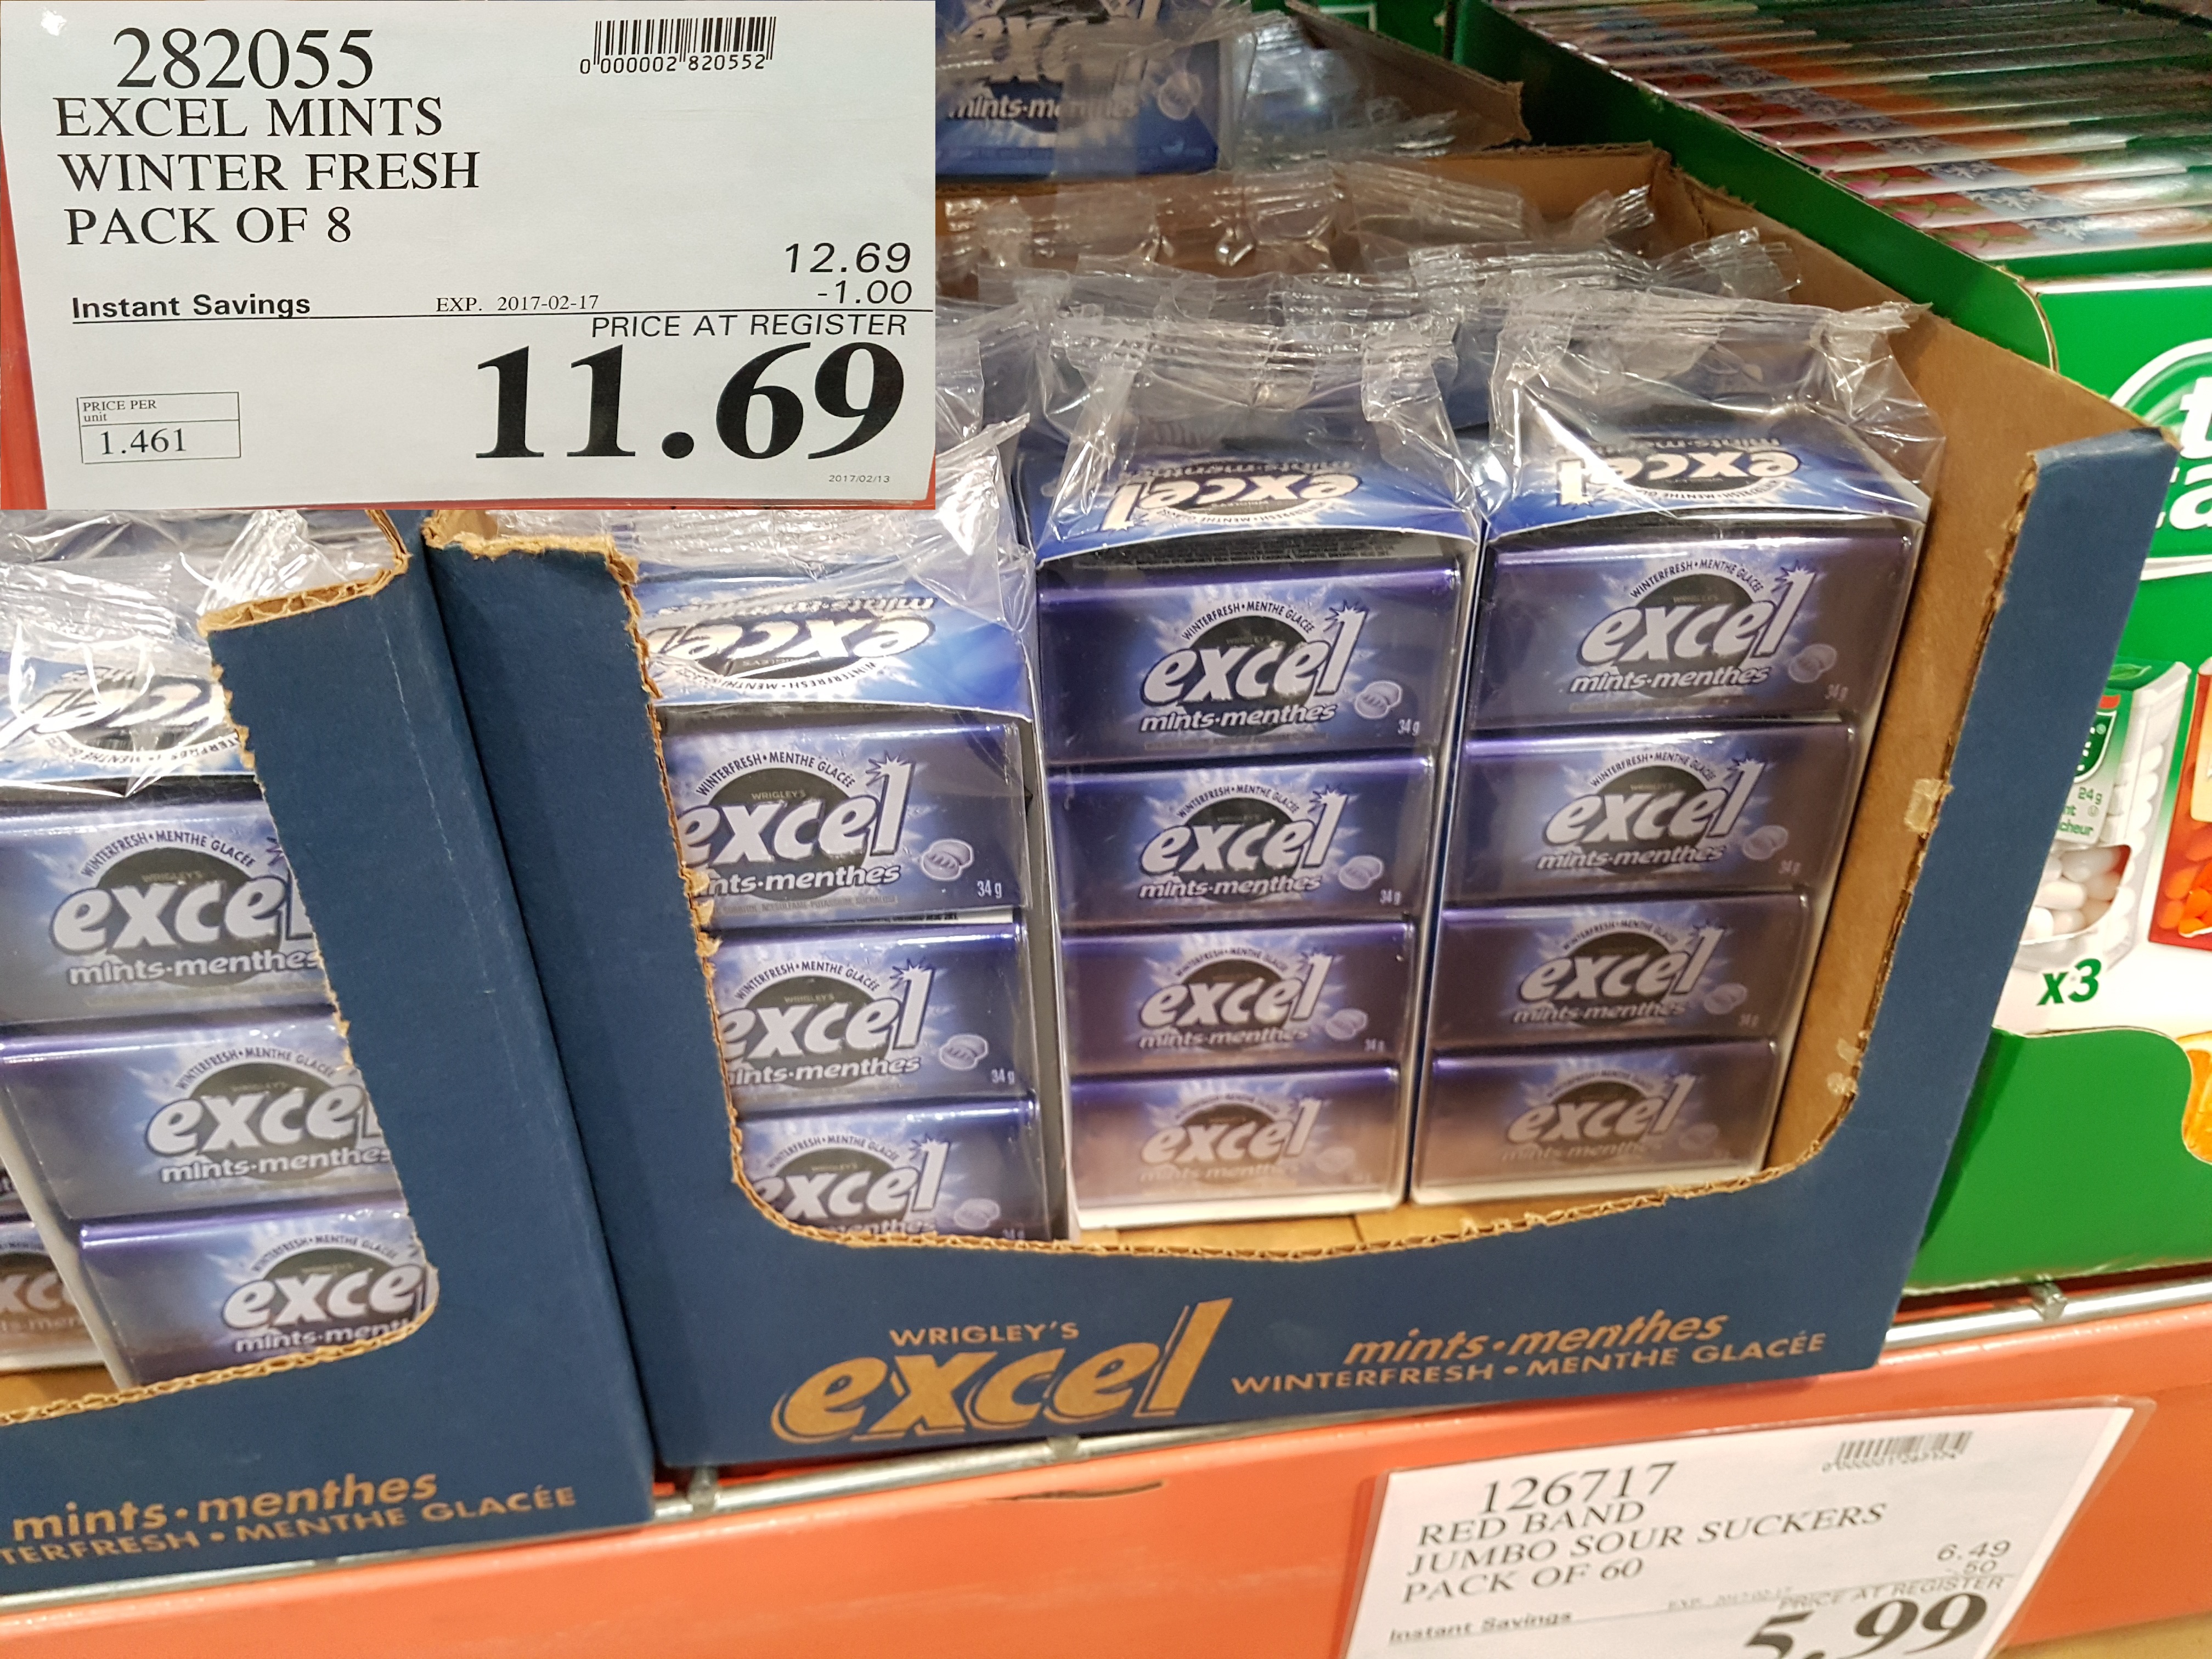 282055 EXCEL MINTS WINTER FRESH PACK OF 8 1 00 INSTANT SAVINGS EXPIRES ON  2017 02 17 11 69 - Costco East Fan Blog